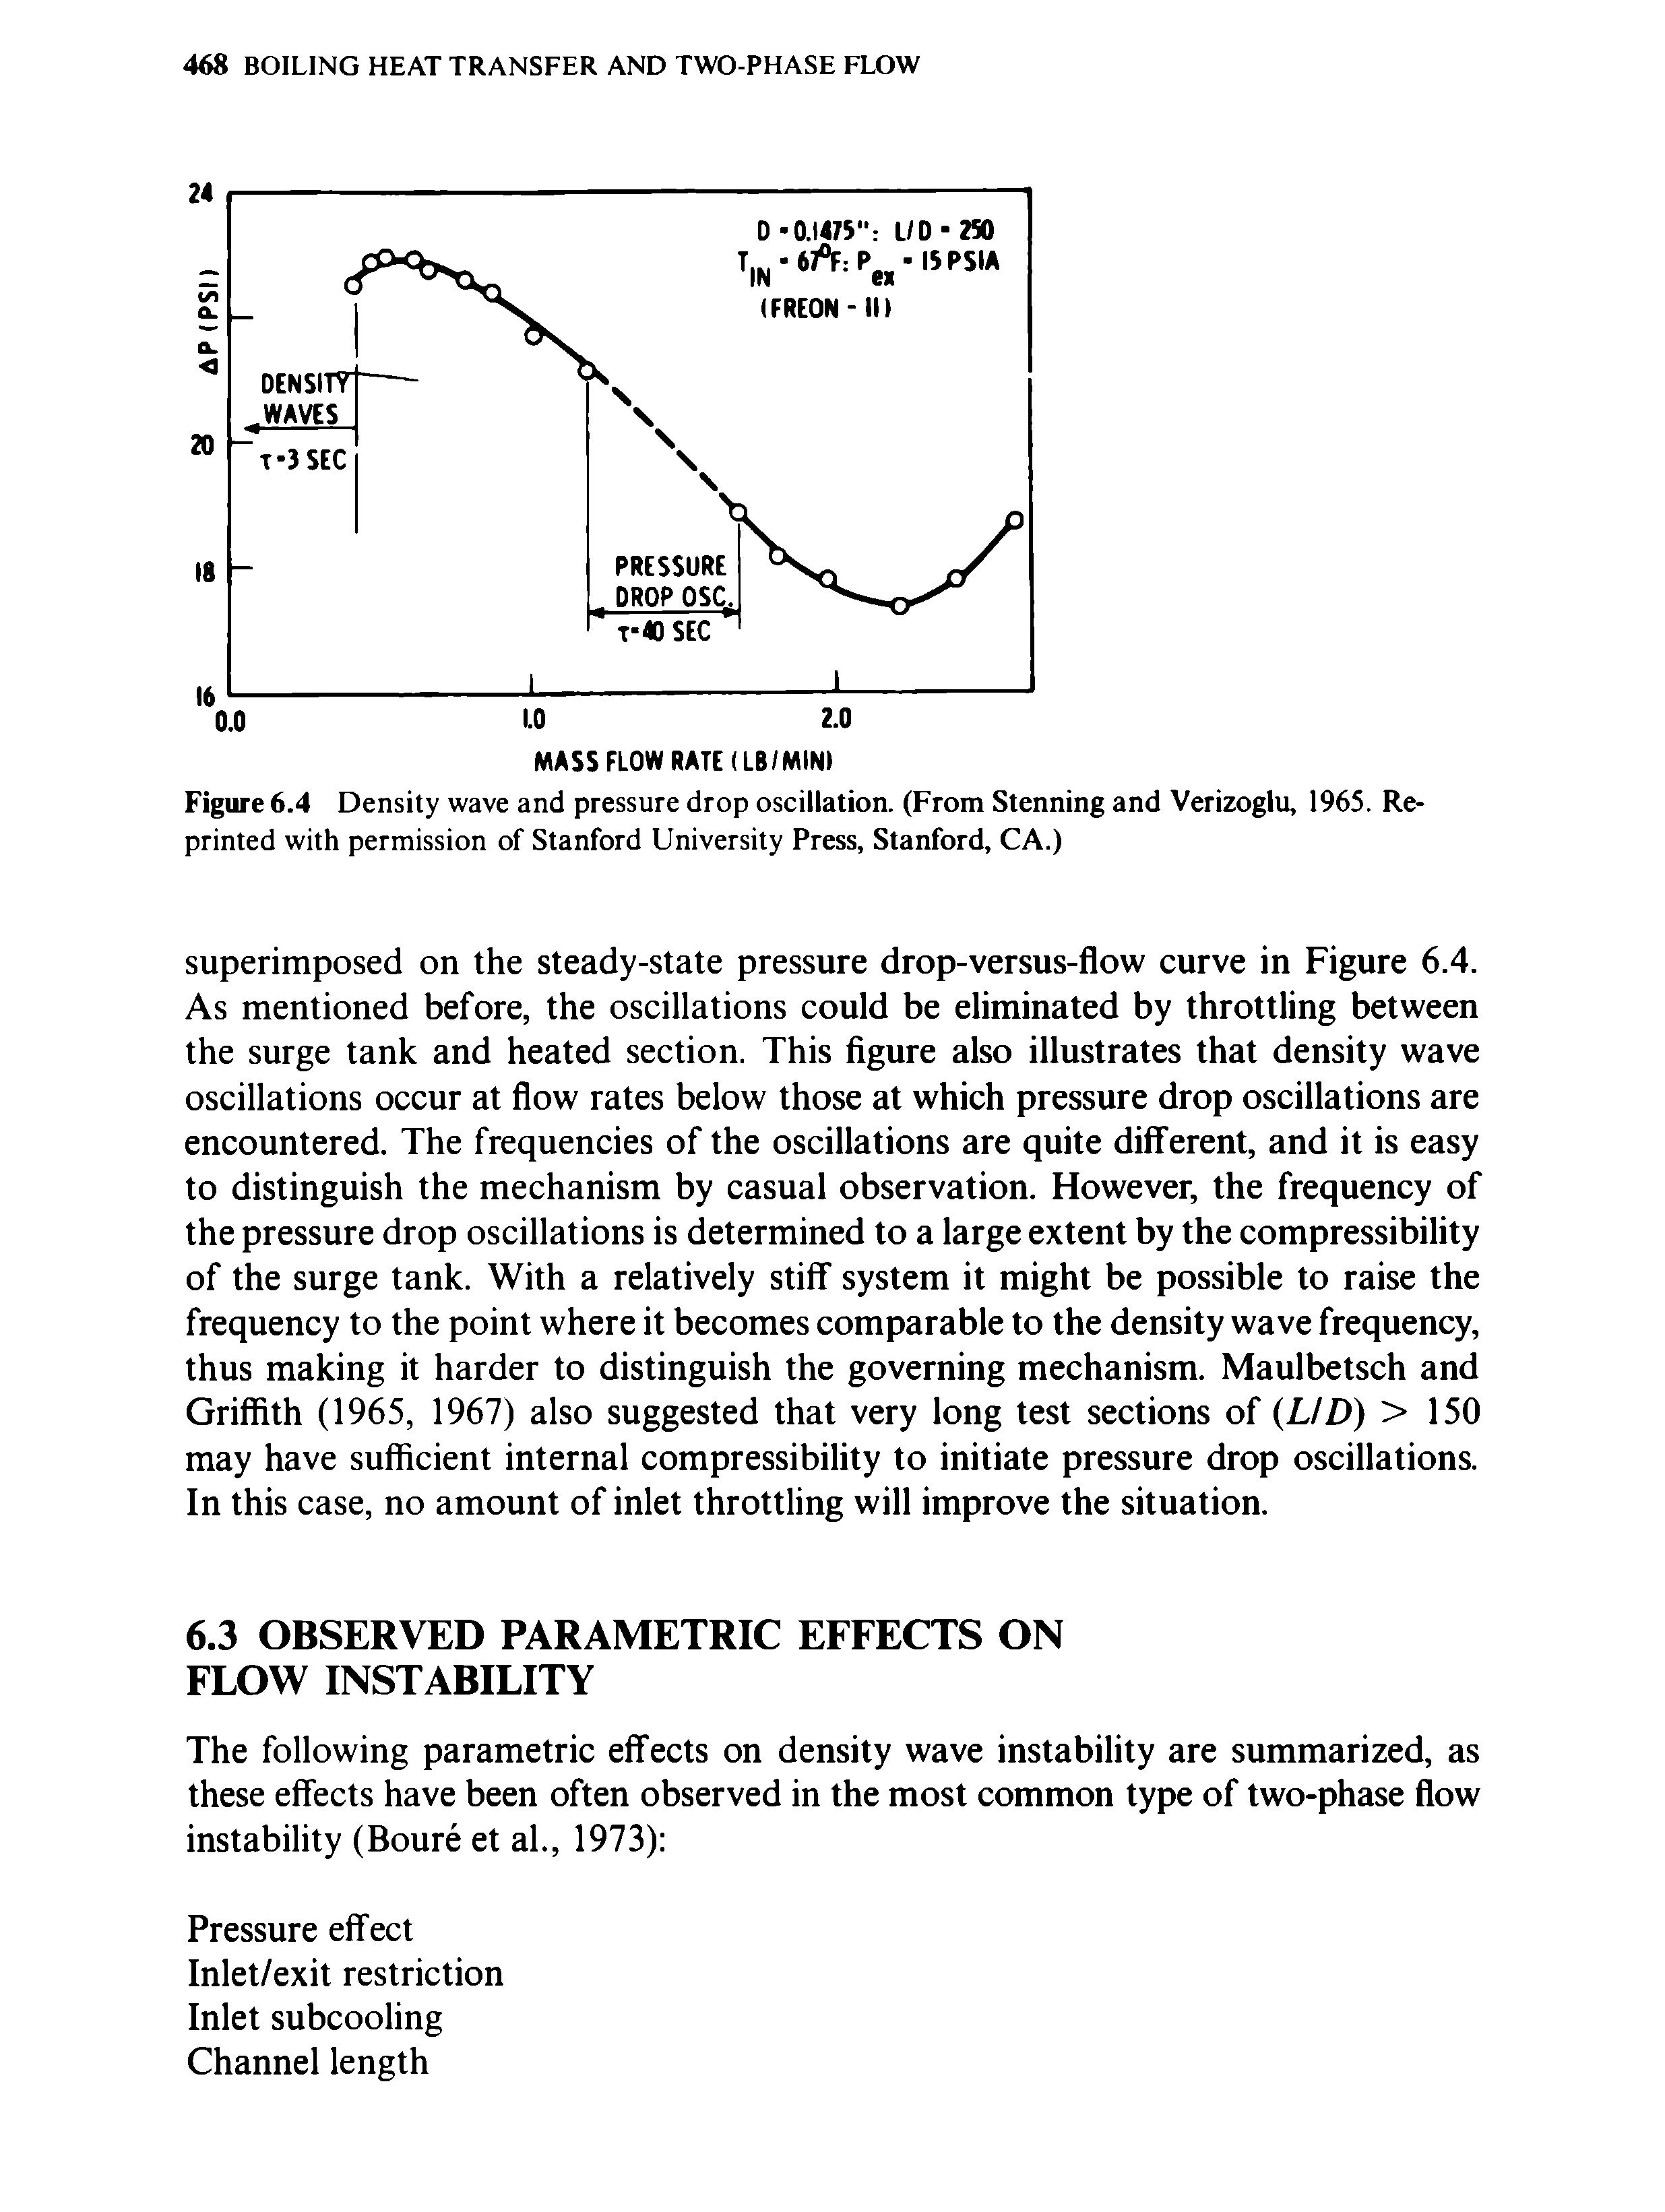 Figure 6.4 Density wave and pressure drop oscillation. (From Stenning and Verizoglu, 1965. Reprinted with permission of Stanford University Press, Stanford, CA.)...